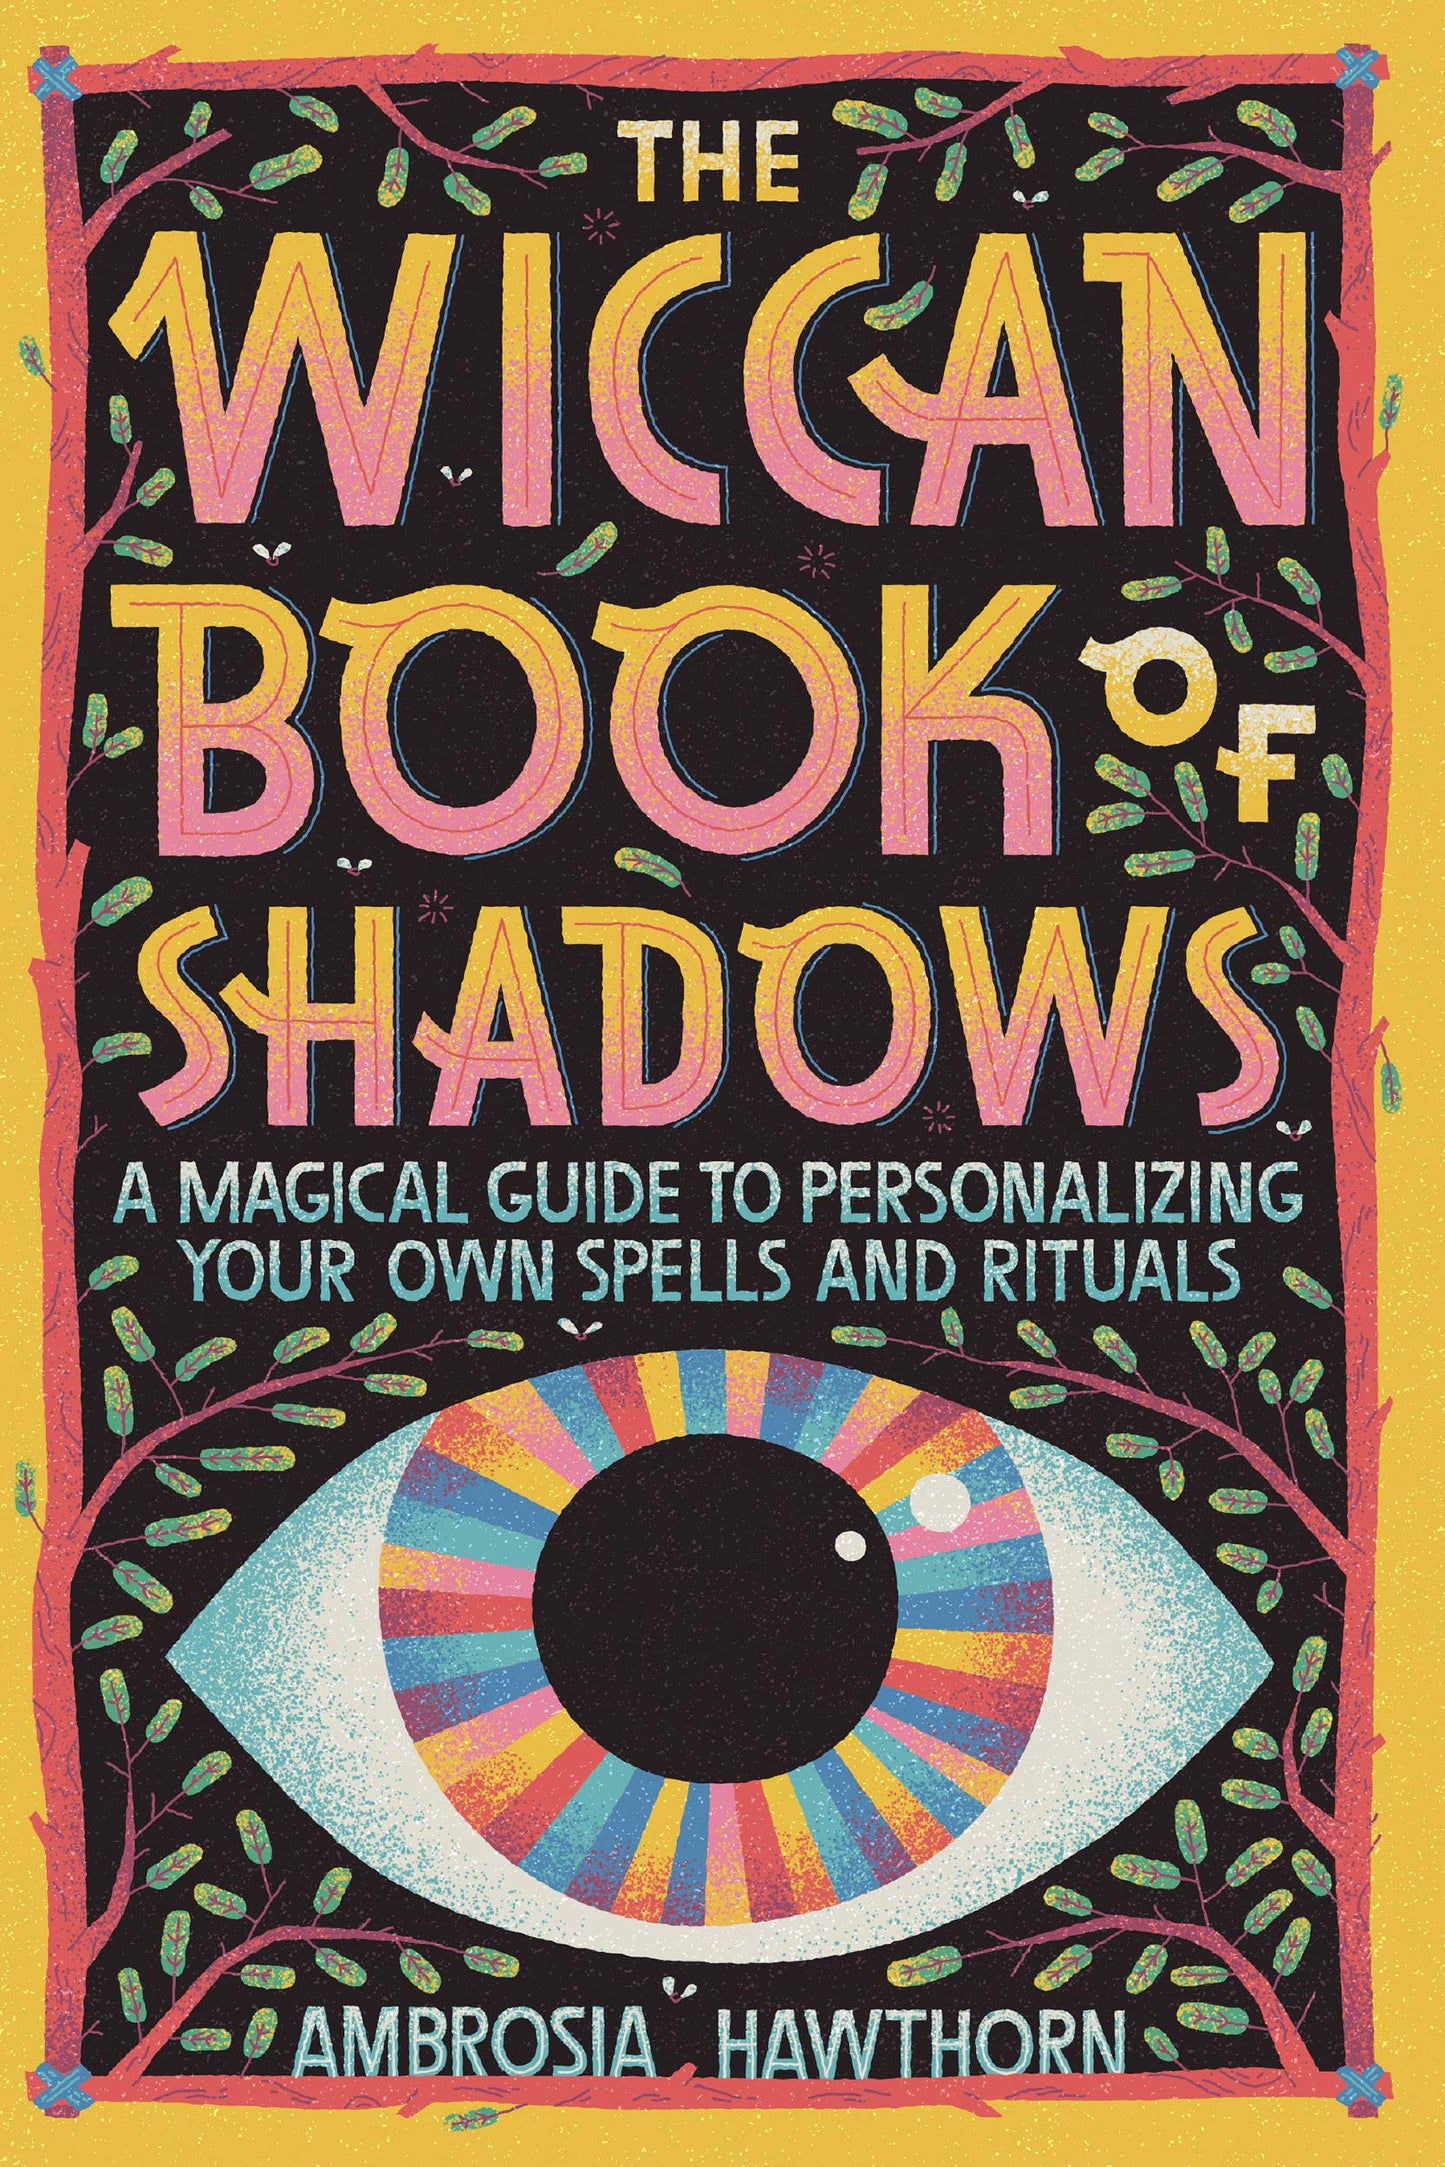 The Wiccan Book of Shadows: A Magical Guide to Personalizing Your Own Spells and Rituals